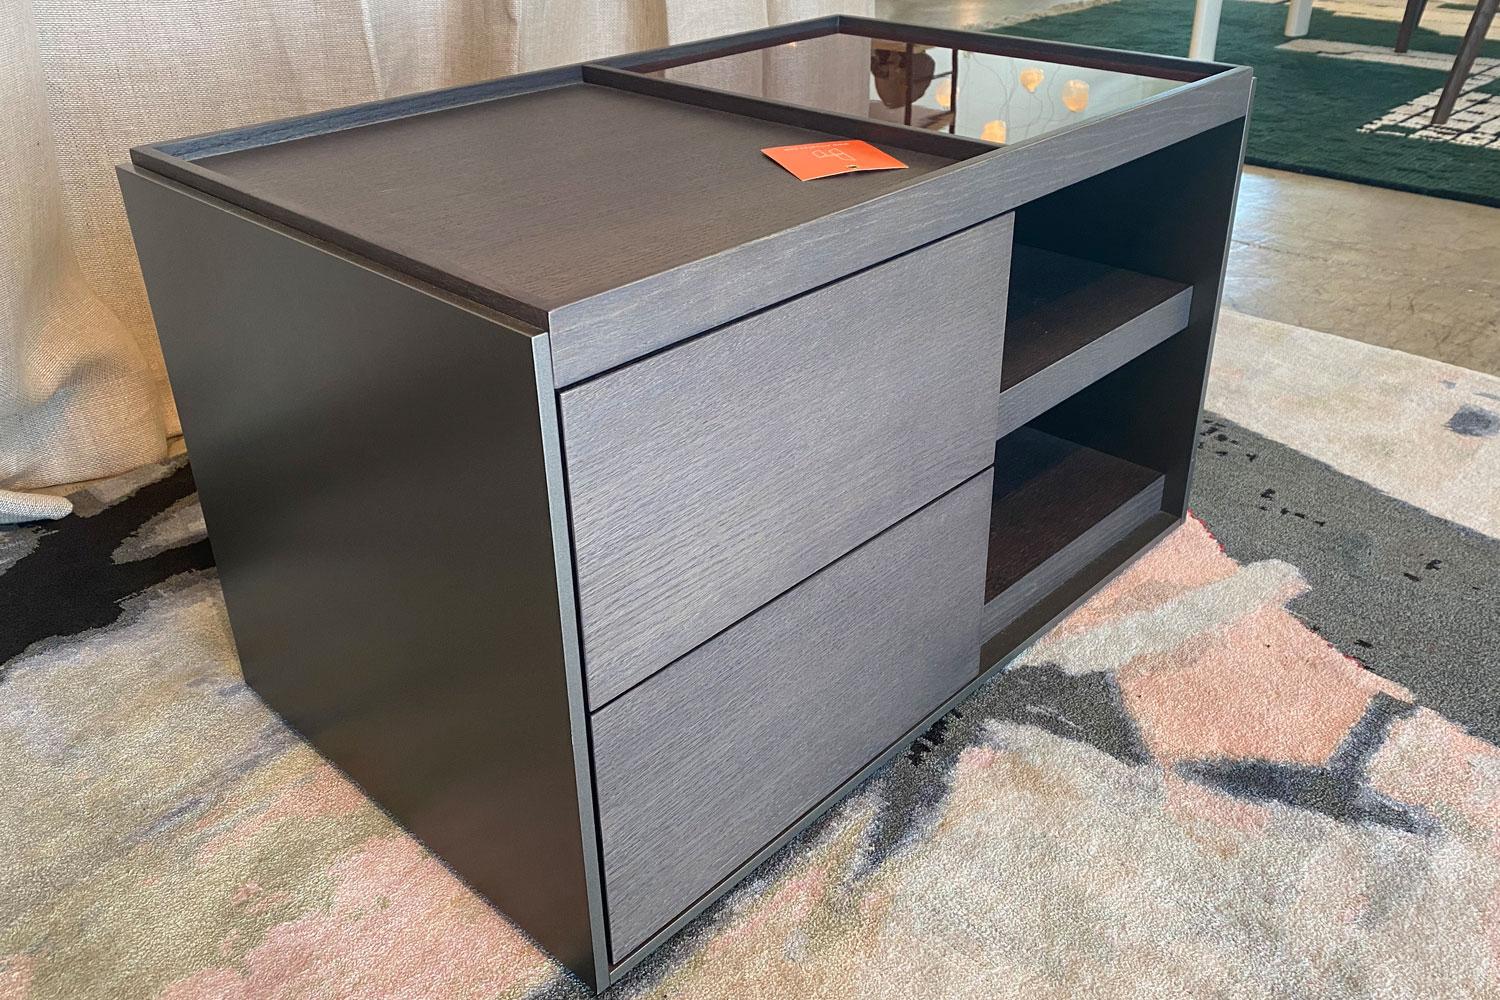 Lacquered Grey Oak Wood Side Table with Drawers + Compartments, B&B Italia